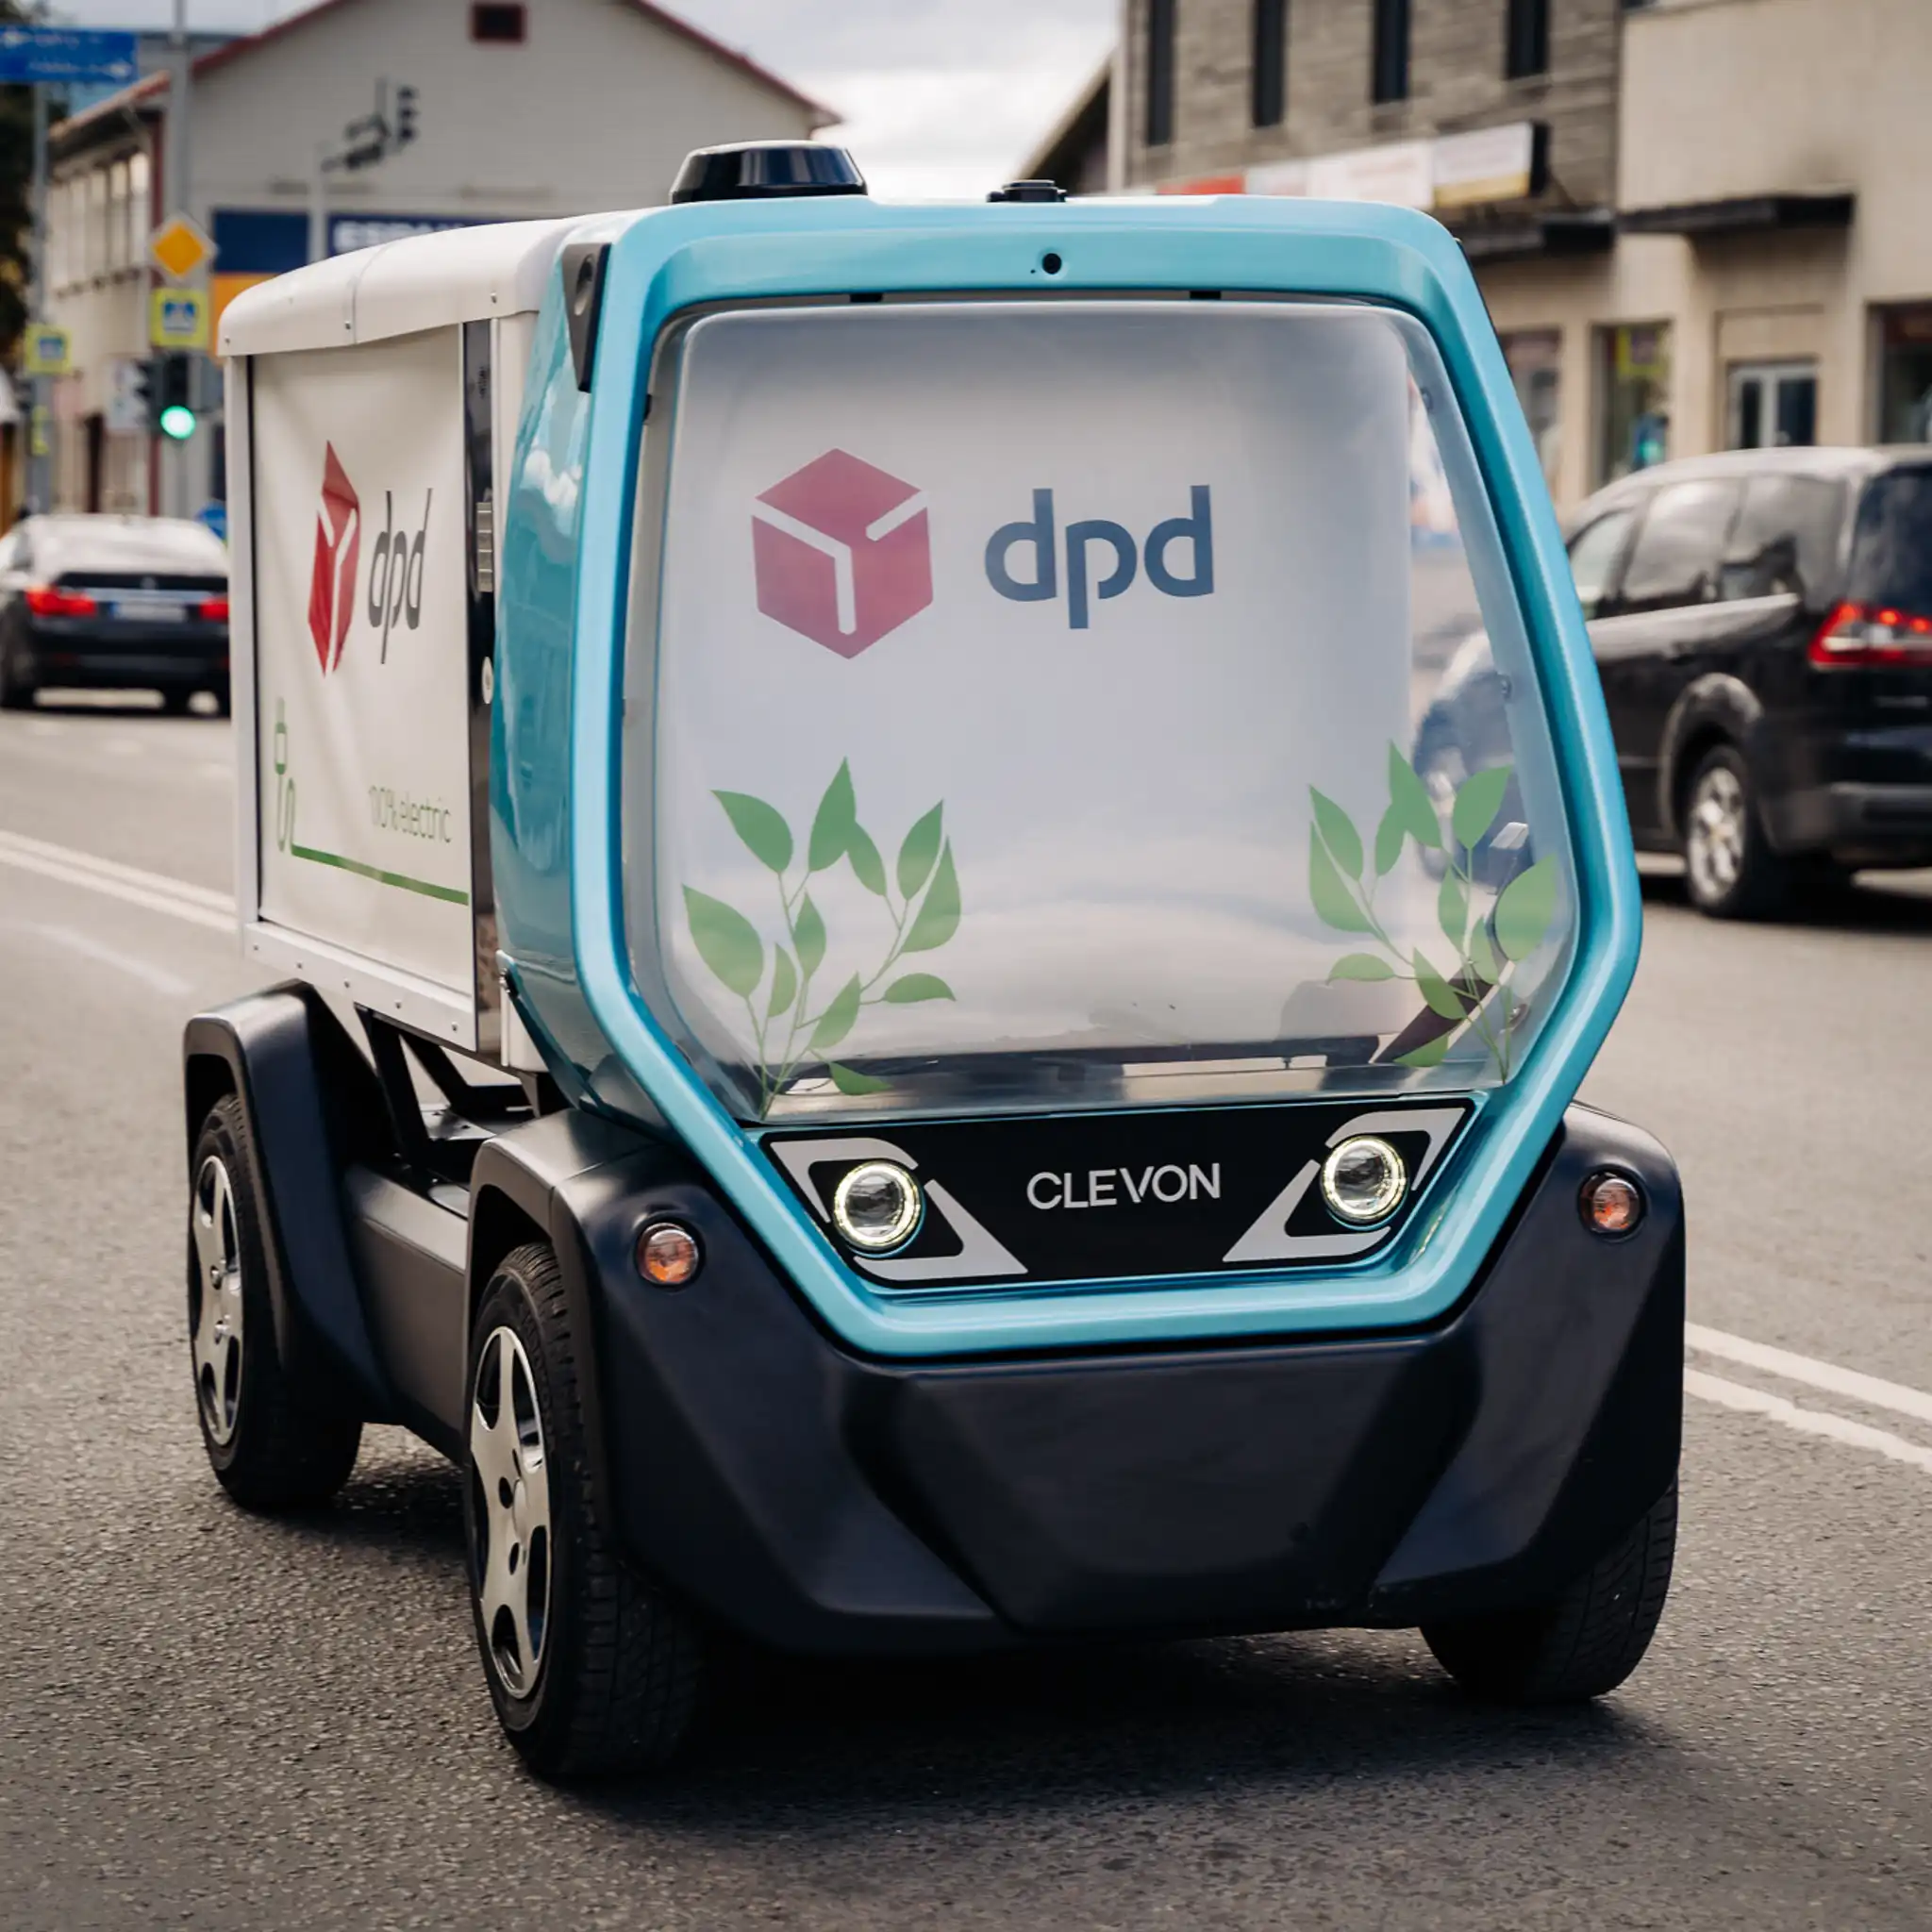 Robot carrier CLEVON 1 delivering with DPD on public roads